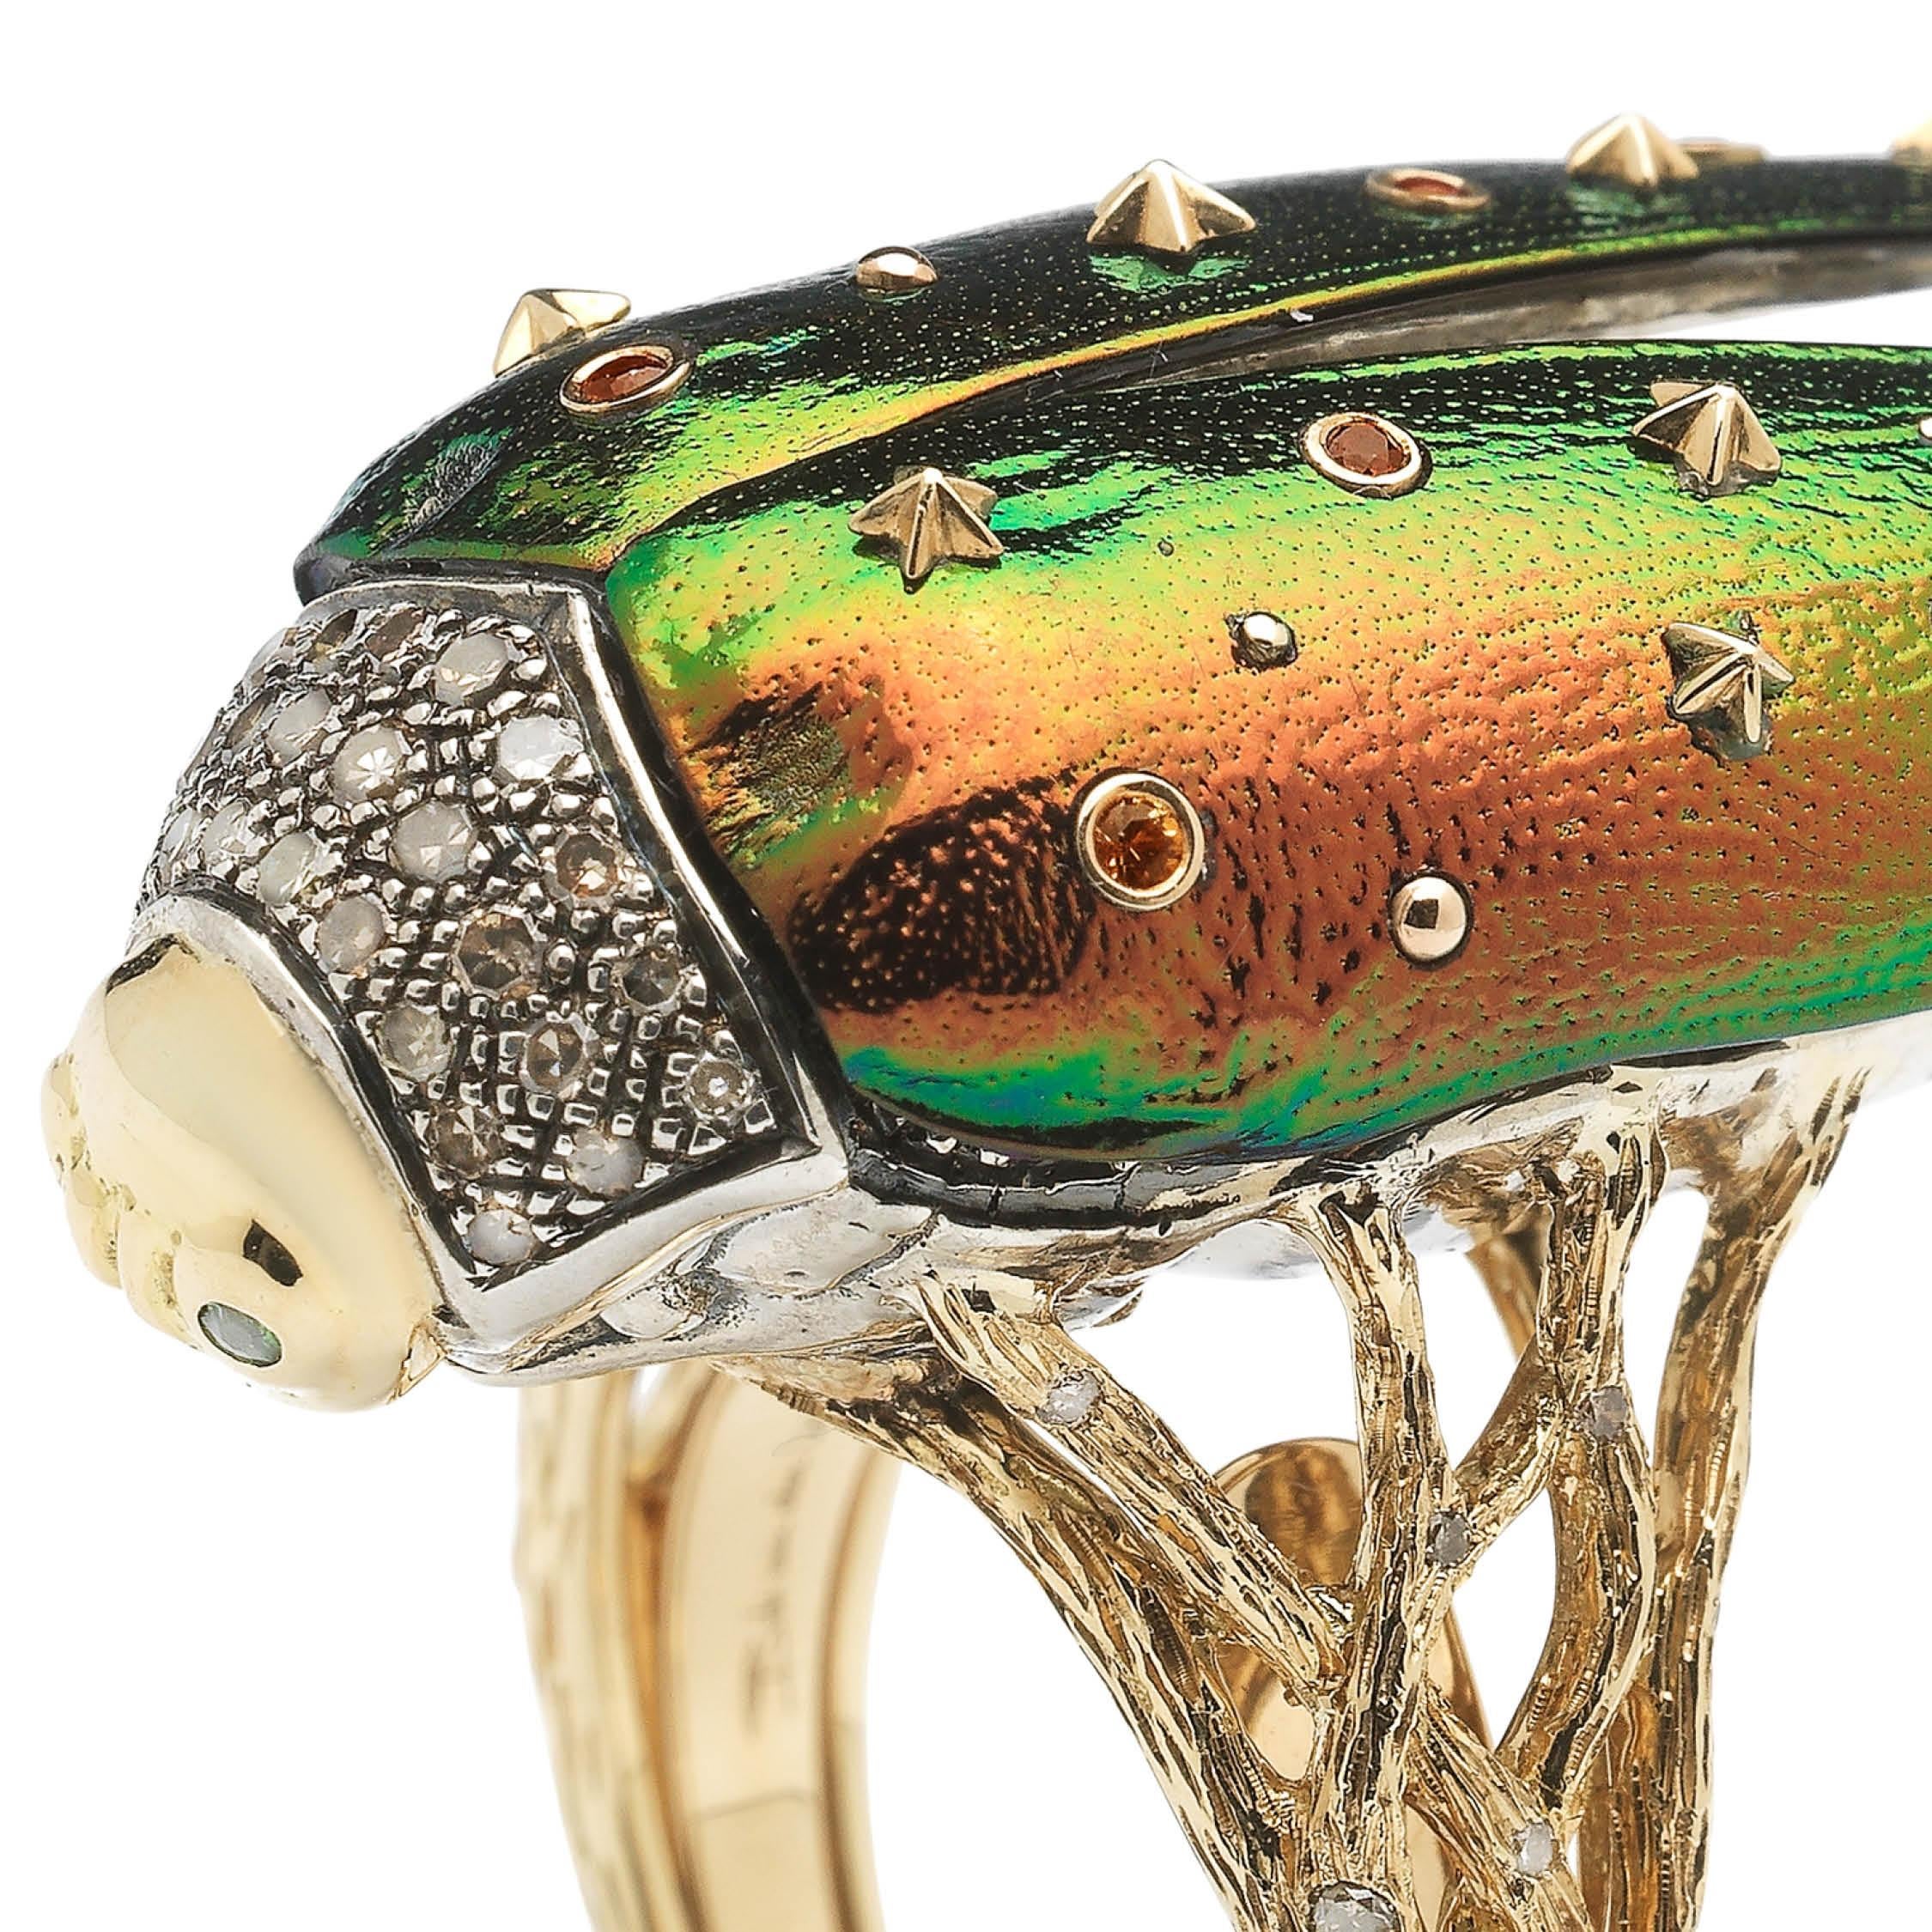 This ornate cocktail ring spotlights the beauty of real scarab wings and their natural iridescence. Designed in 18k yellow gold and sterling silver, the bold scarab beetle in this ring is embellished with white and brown diamonds and green tsavorite